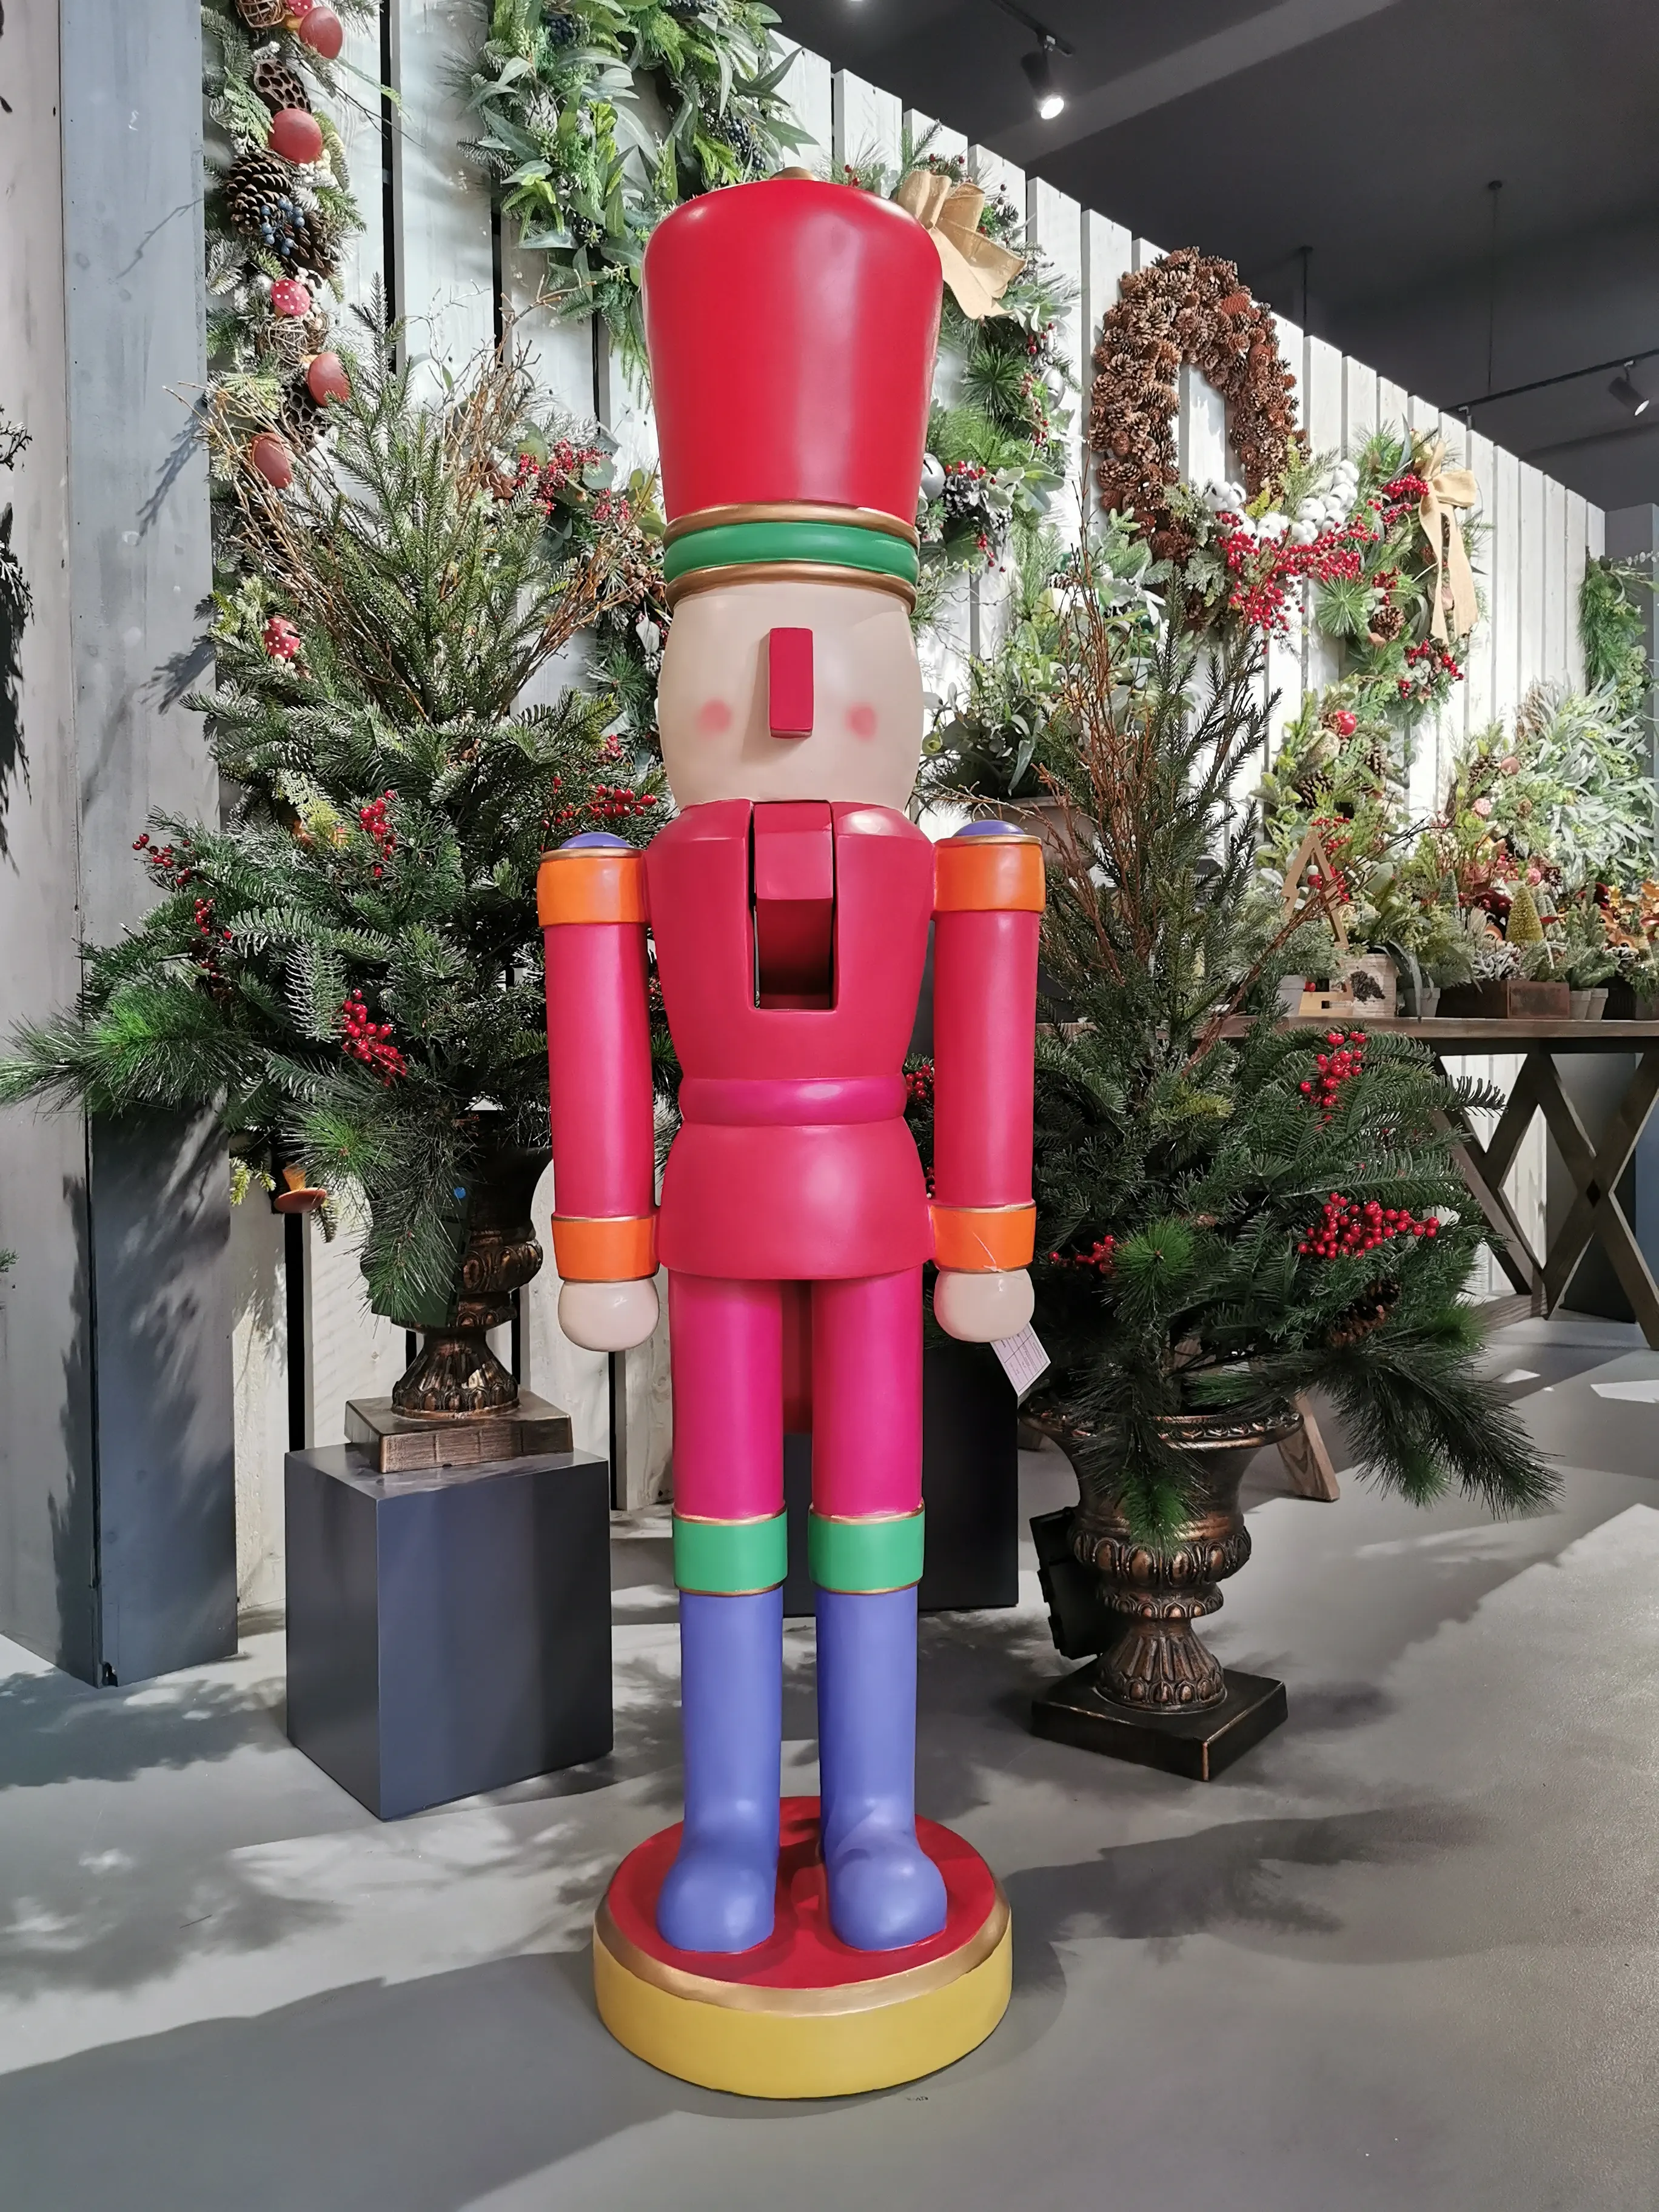 Christmas Soldiers Nutcracker Soldier 6 ft Large Nutcracker Soldier For Christmas Decoration Supplies